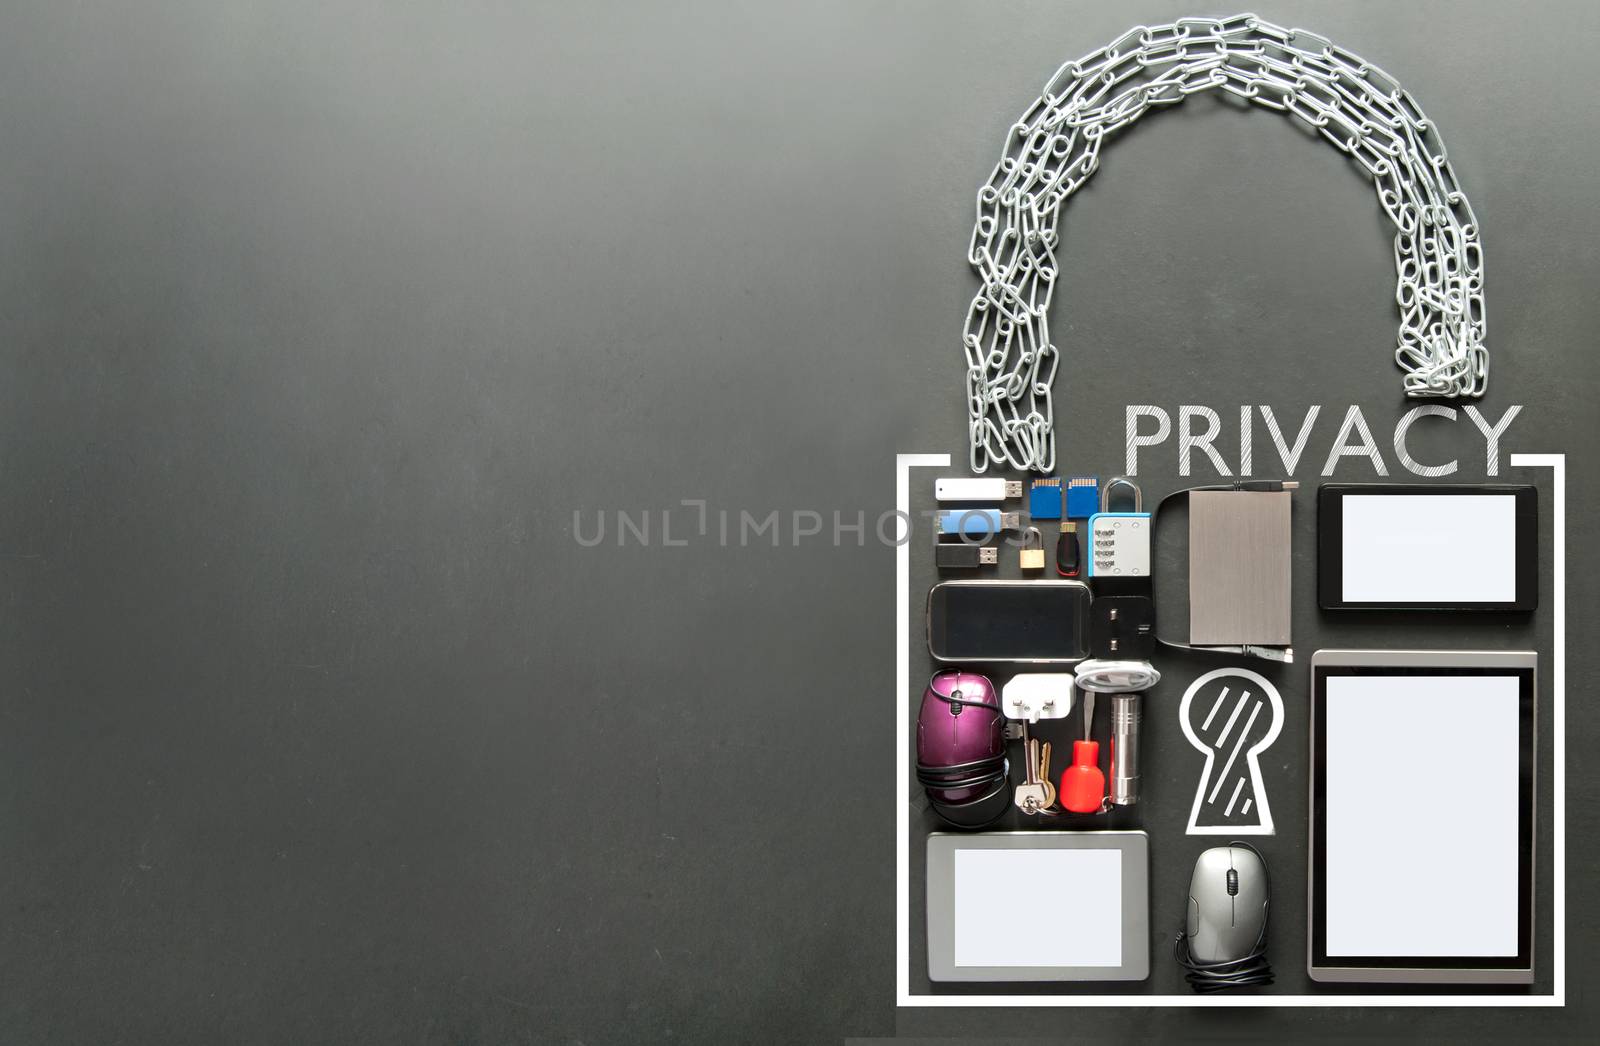 Privacy written inside a padlock made from devices including tablets, computer mouse, usb cards on a chalkboard background